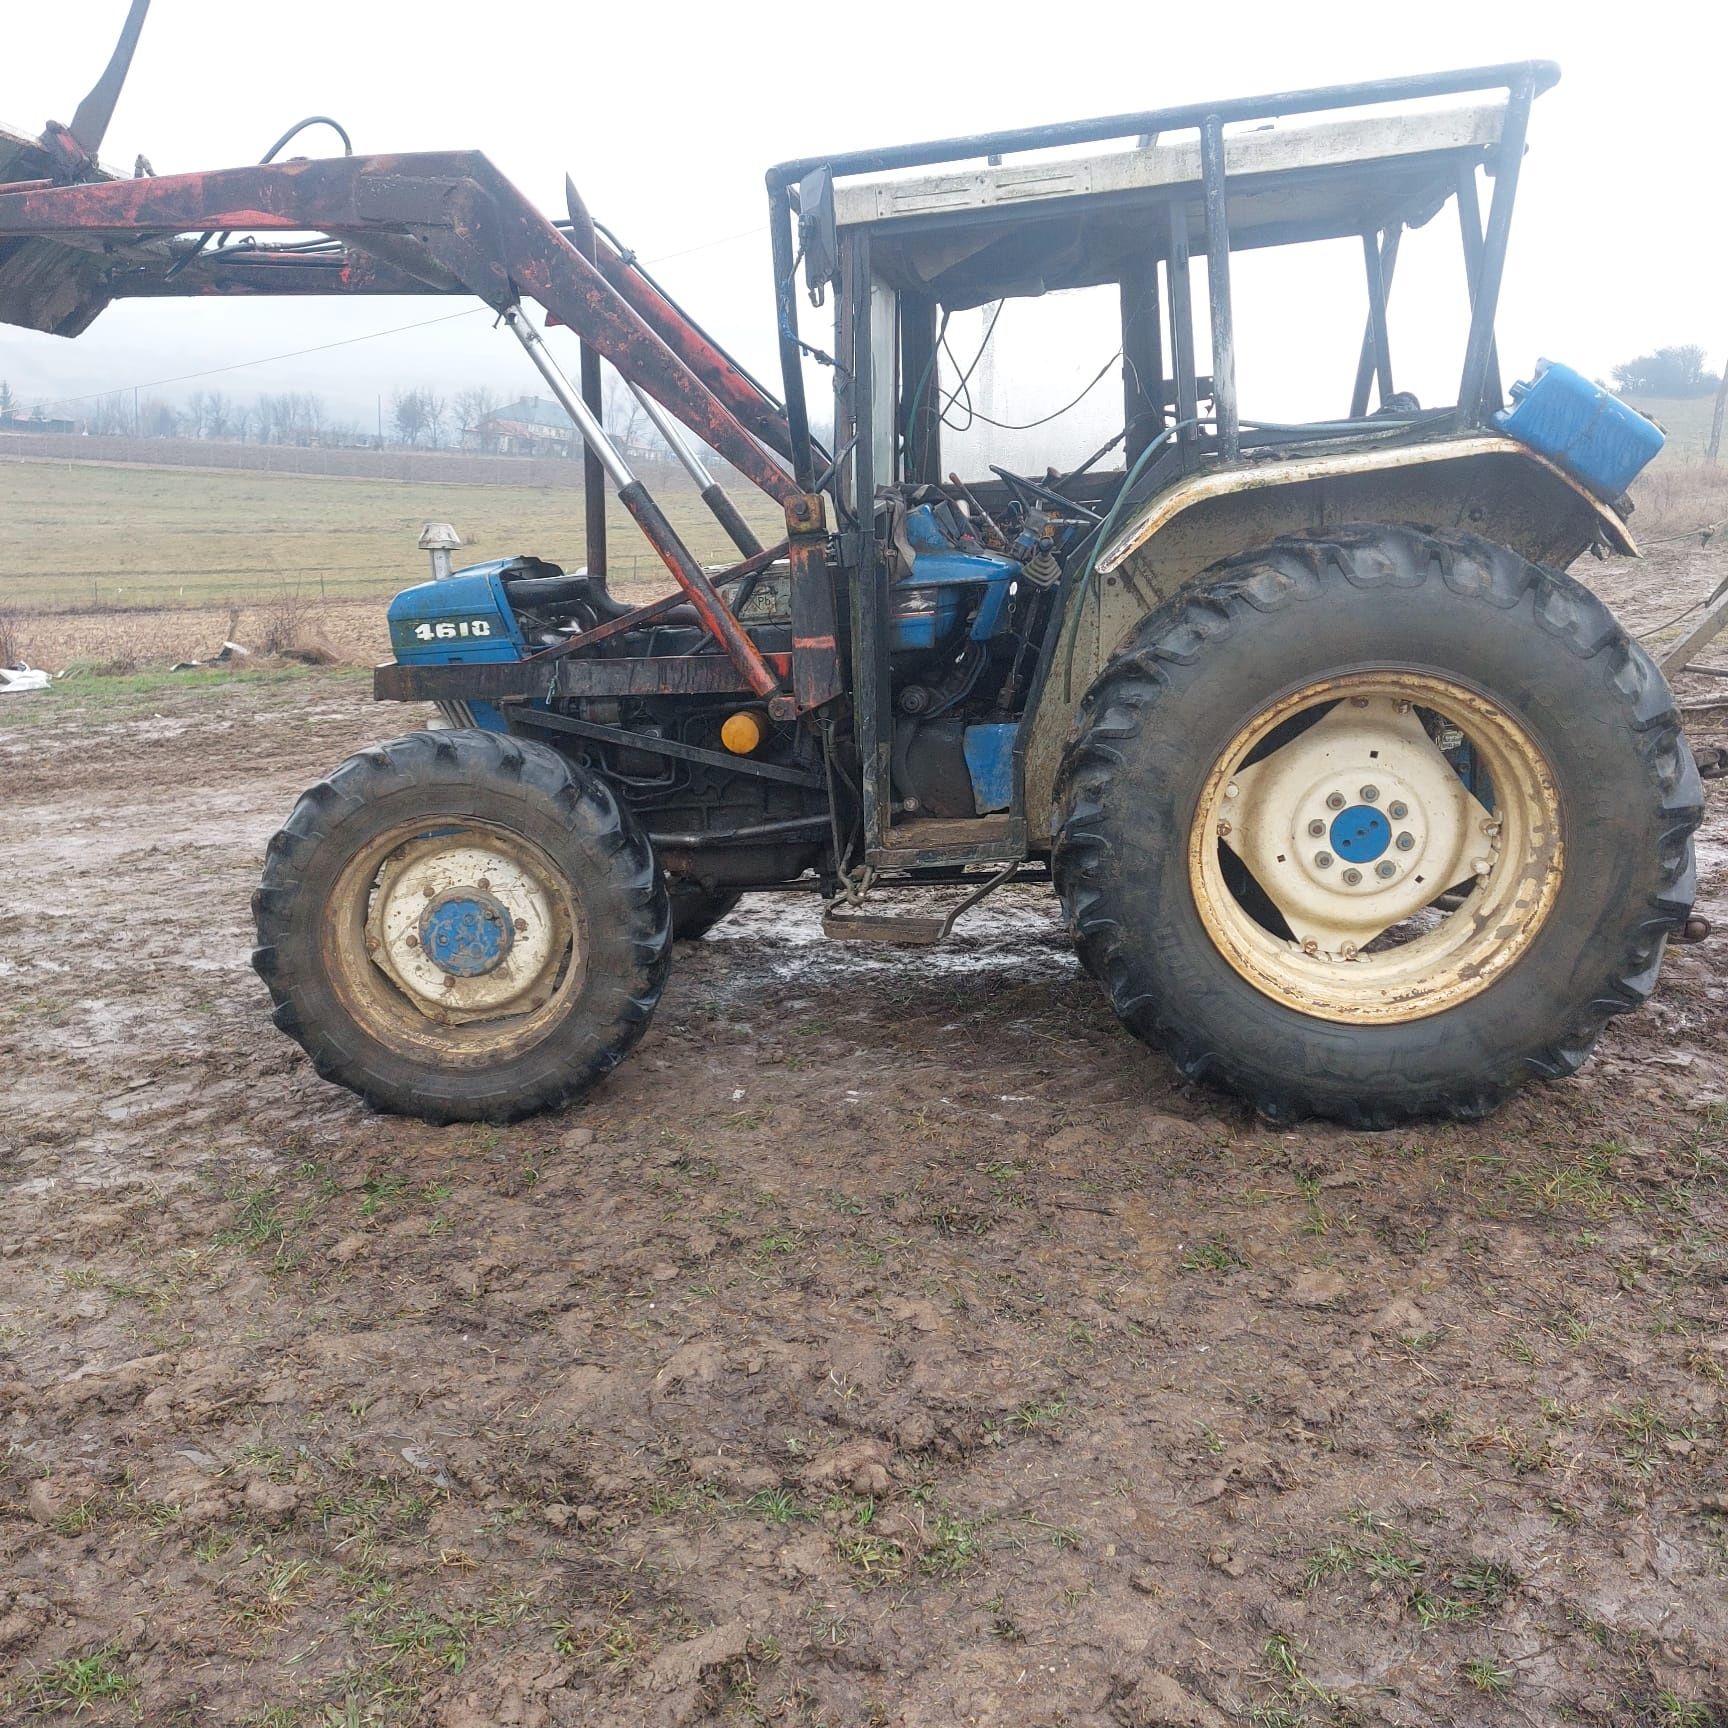 Vând tractor Ford 4610